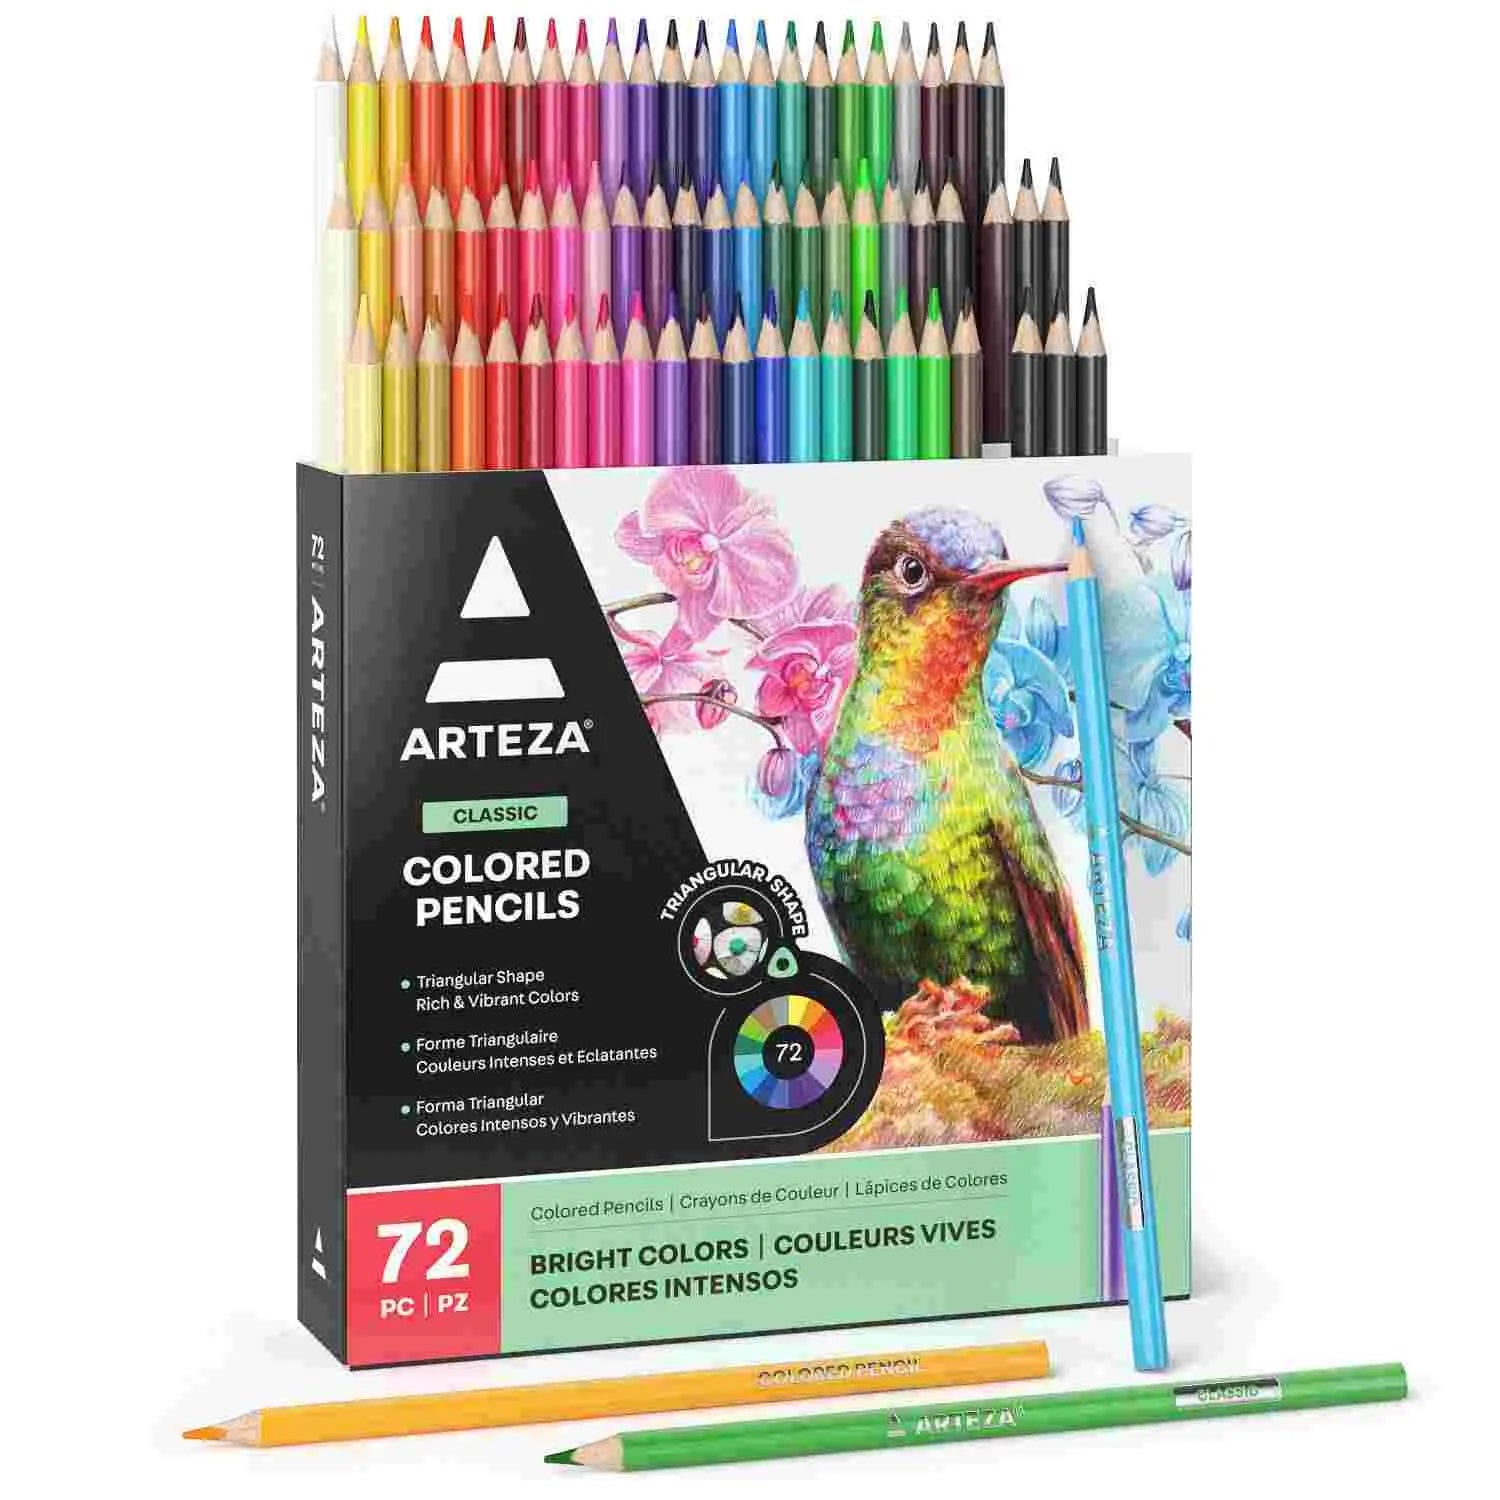 https://cdn.shopify.com/s/files/1/0592/9222/1628/files/ARTEZA-Colored-Pencils-for-Adult-Coloring-with-Case_-72-Assorted-Drawing-Pencils-in-Vibrant-Colors_-Pencil-Set-for-Coloring-Books-and-Journals_-Triangular-Shape_-Professional-Art-Supp_6b979373-4a01-4775-afd6-07b5f9d0072d.jpg?v=1695380870